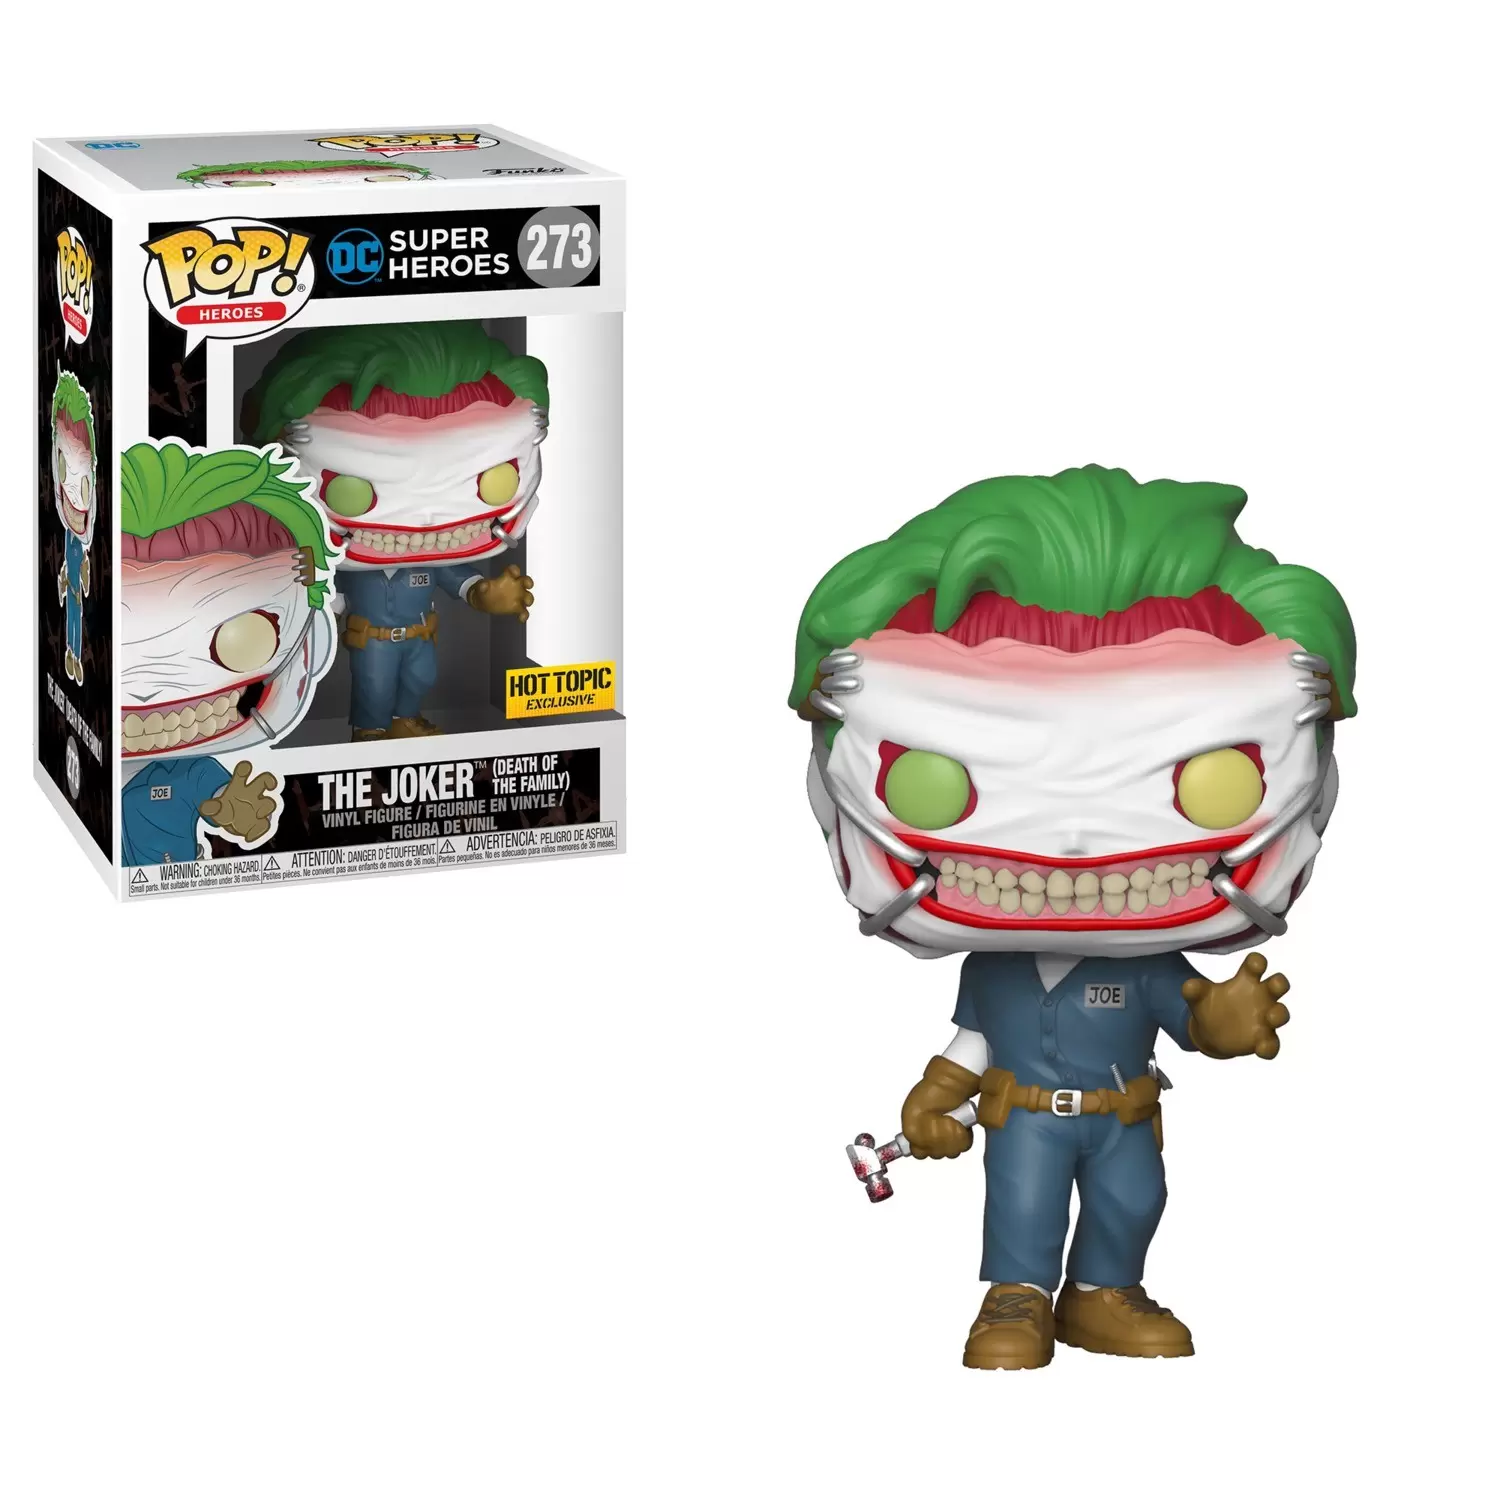 POP! Heroes - DC Super Heroes - The Joker Death of the Family